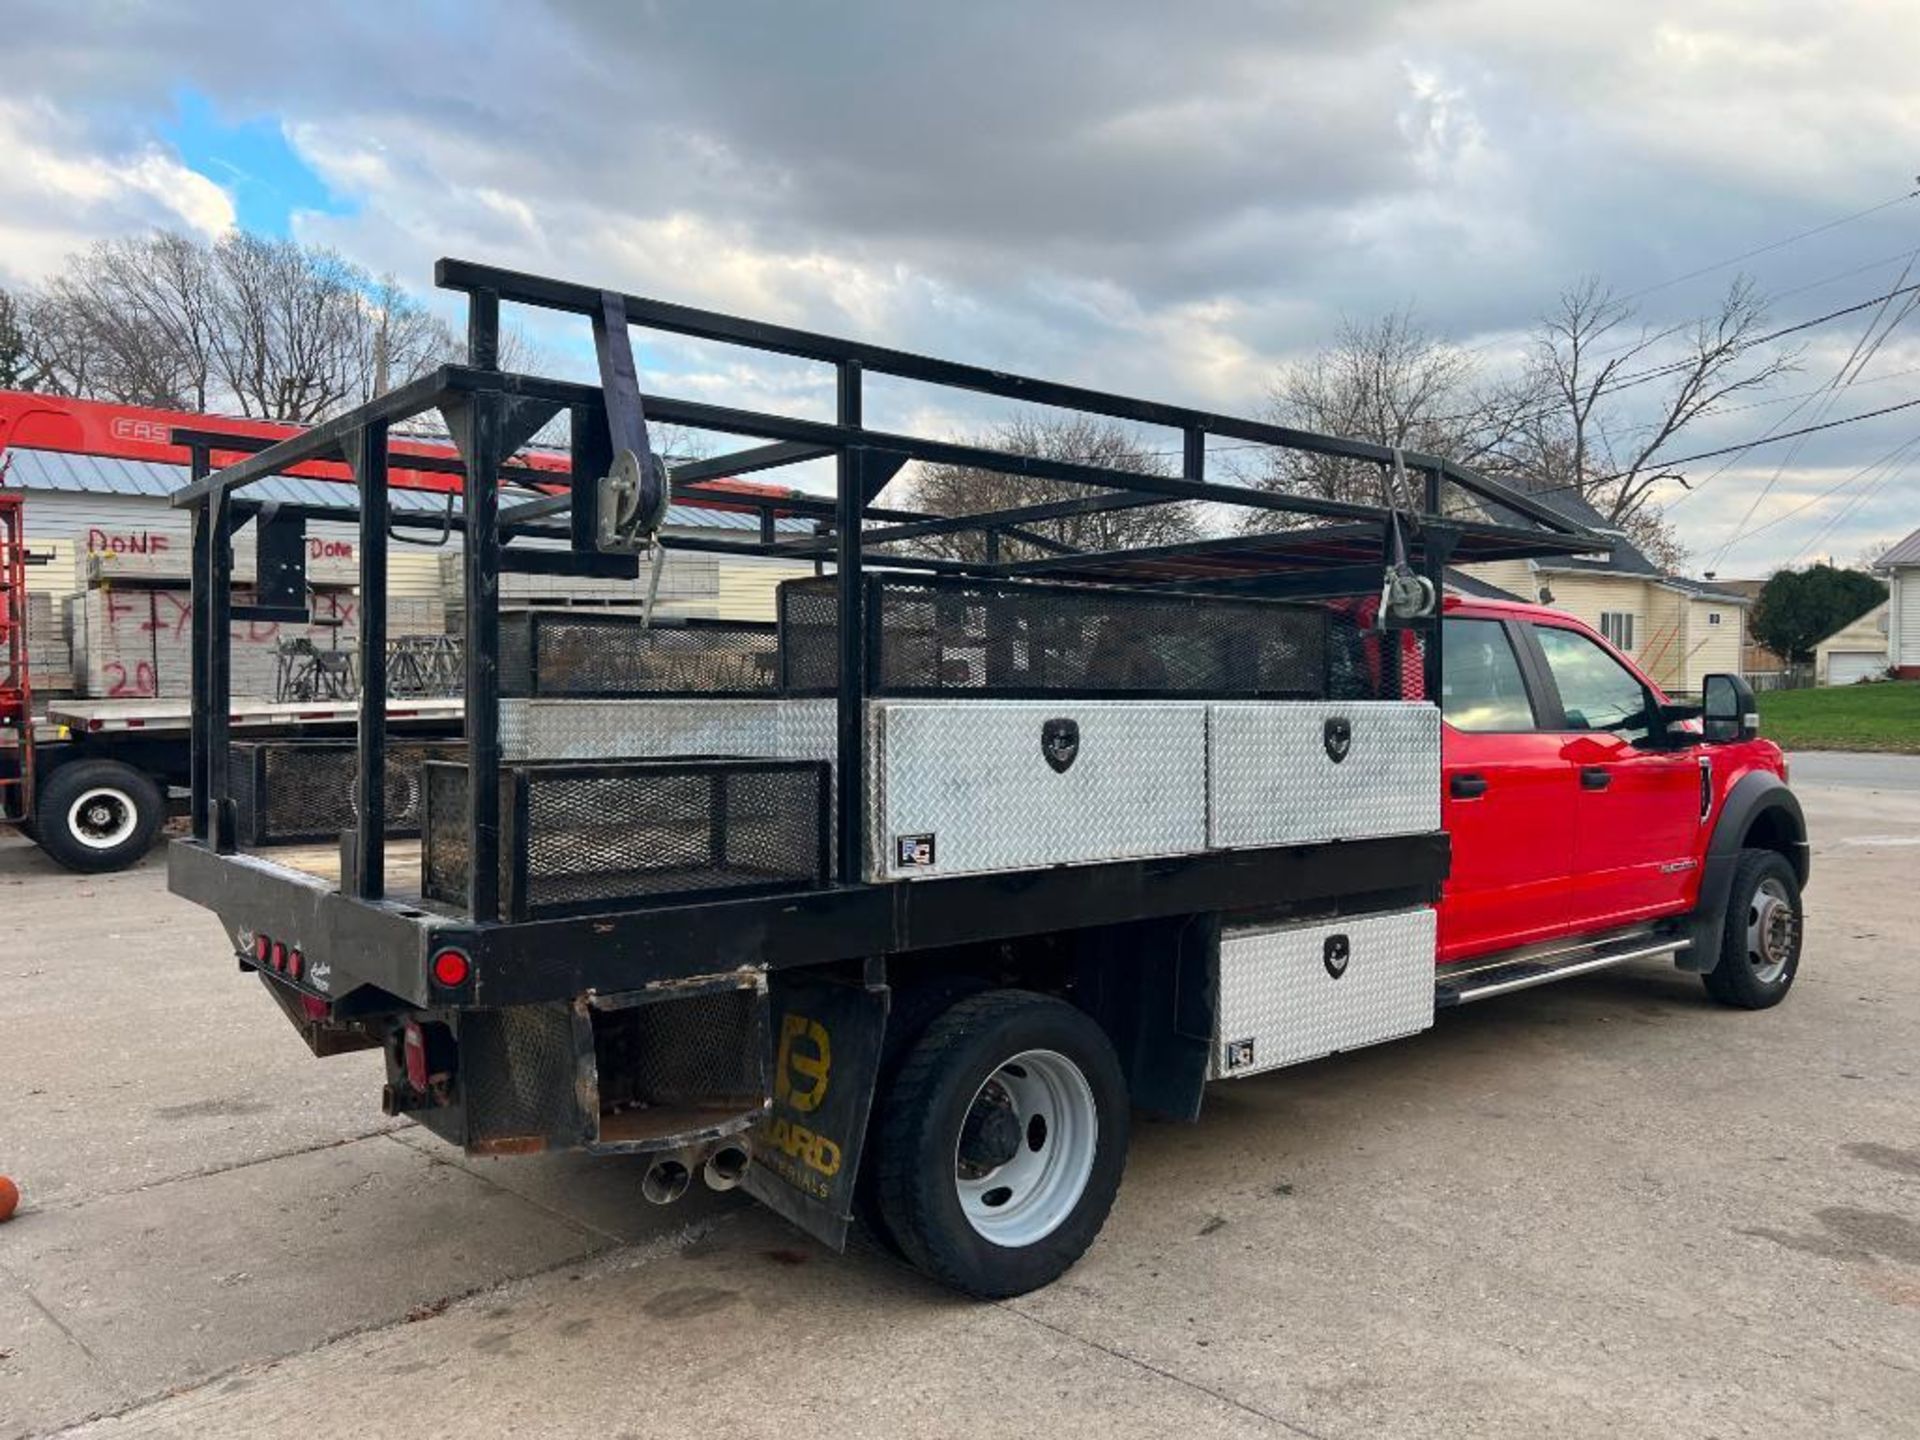 2019 Ford F550 4X4 Crew Cab Truck, VIN #1FD0W5HT1KEE51904, Miles 111,556, 6-Speed Automatic Transmis - Image 5 of 29